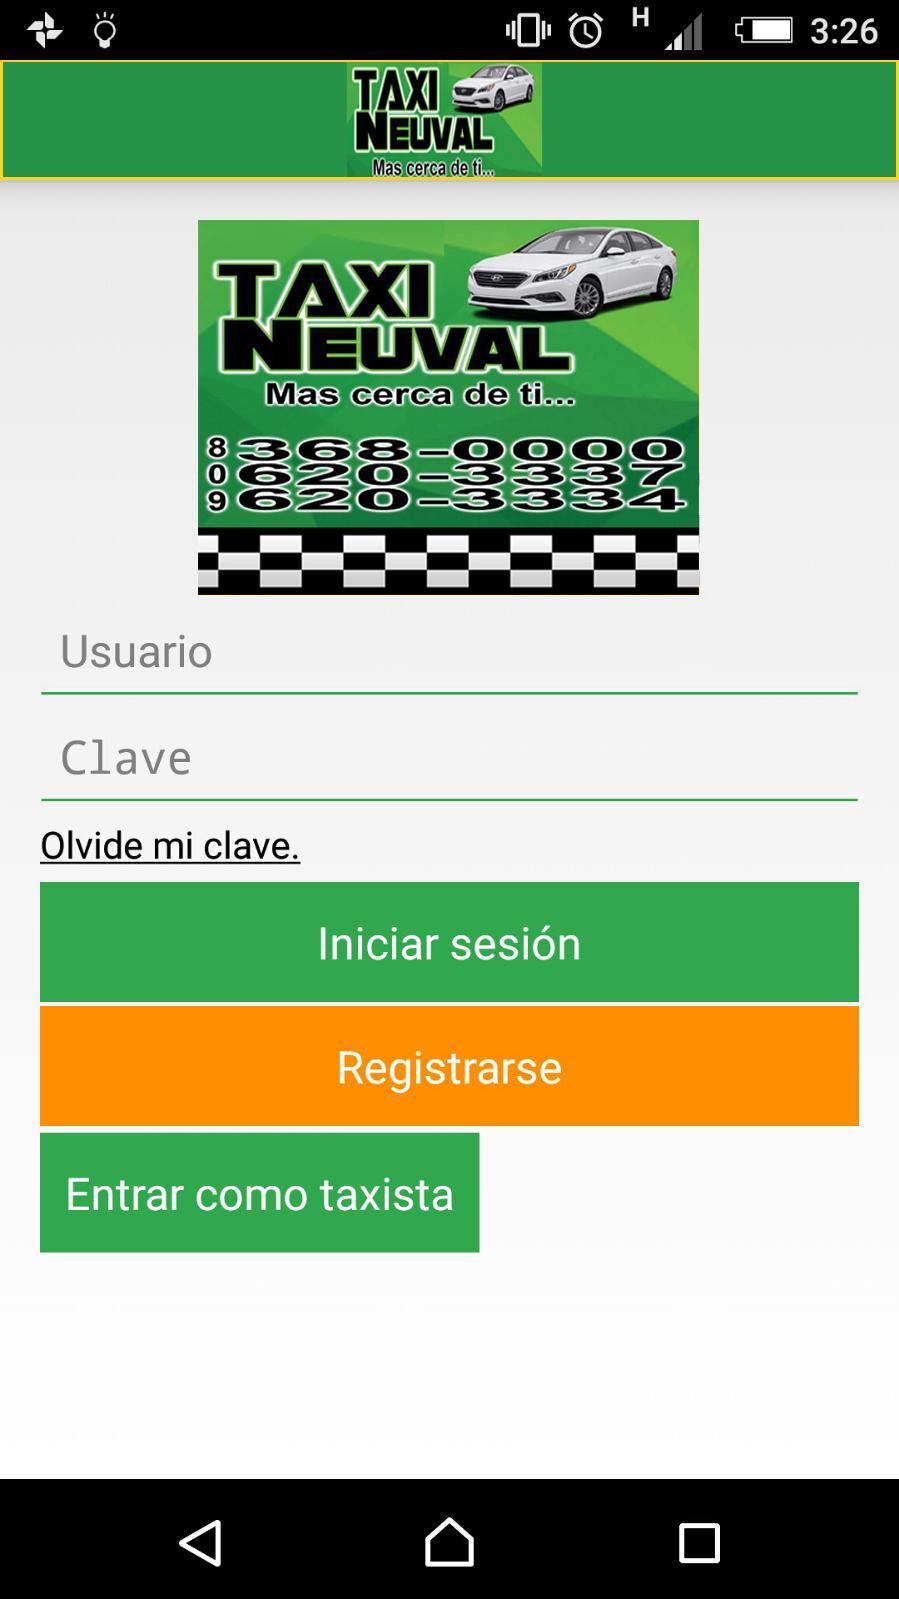 Neuval Taxi for Android - APK Download